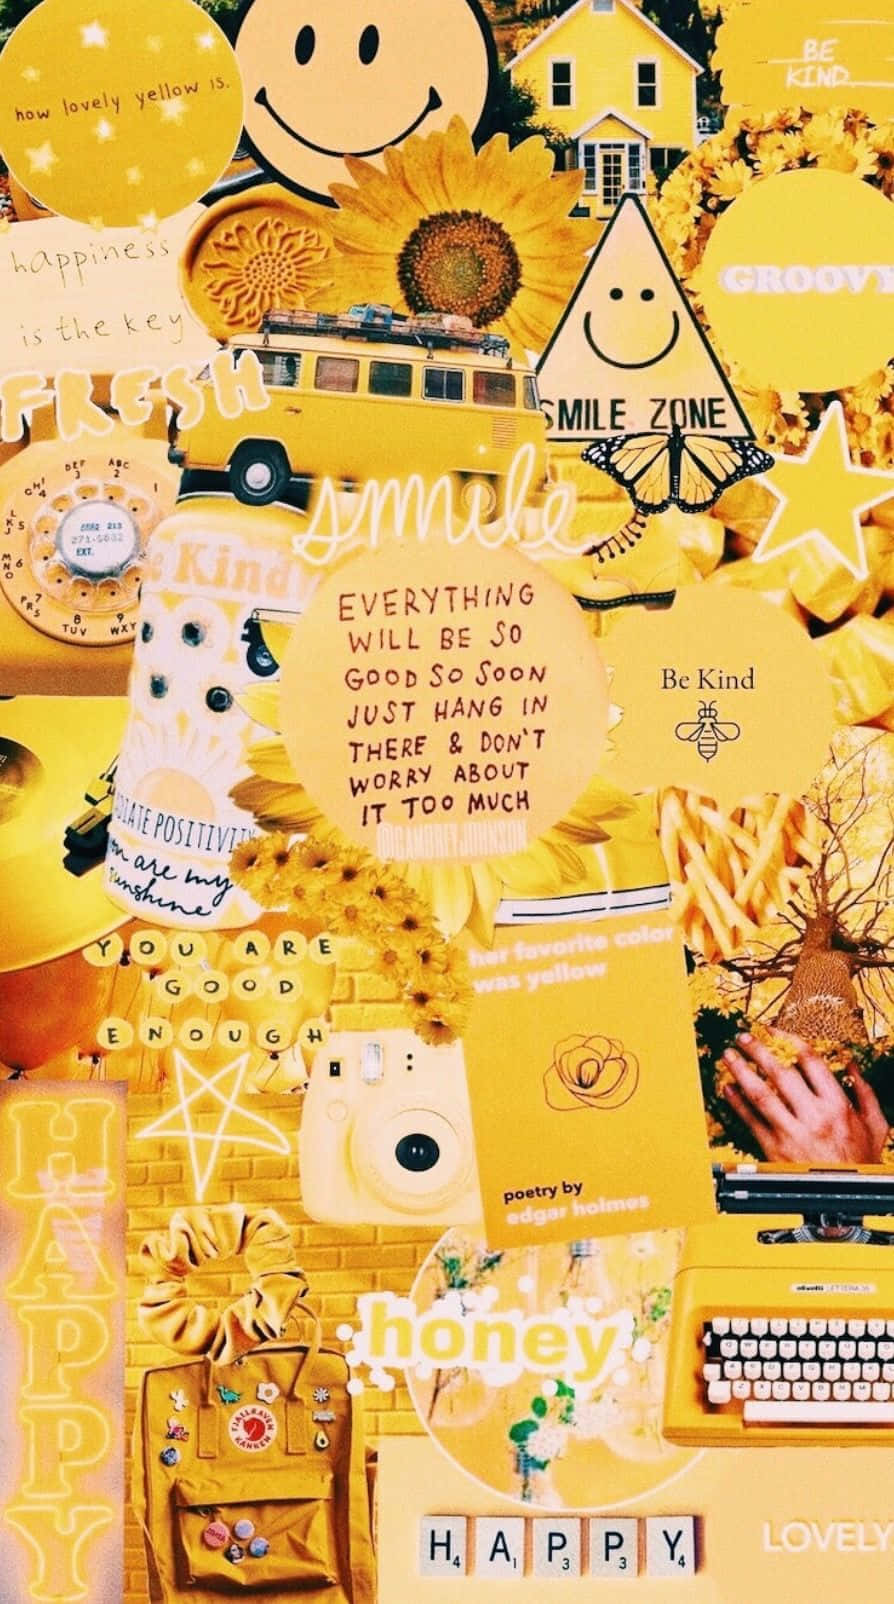 Quotes And Smileys In Yellow Aesthetic iPhone Wallpaper